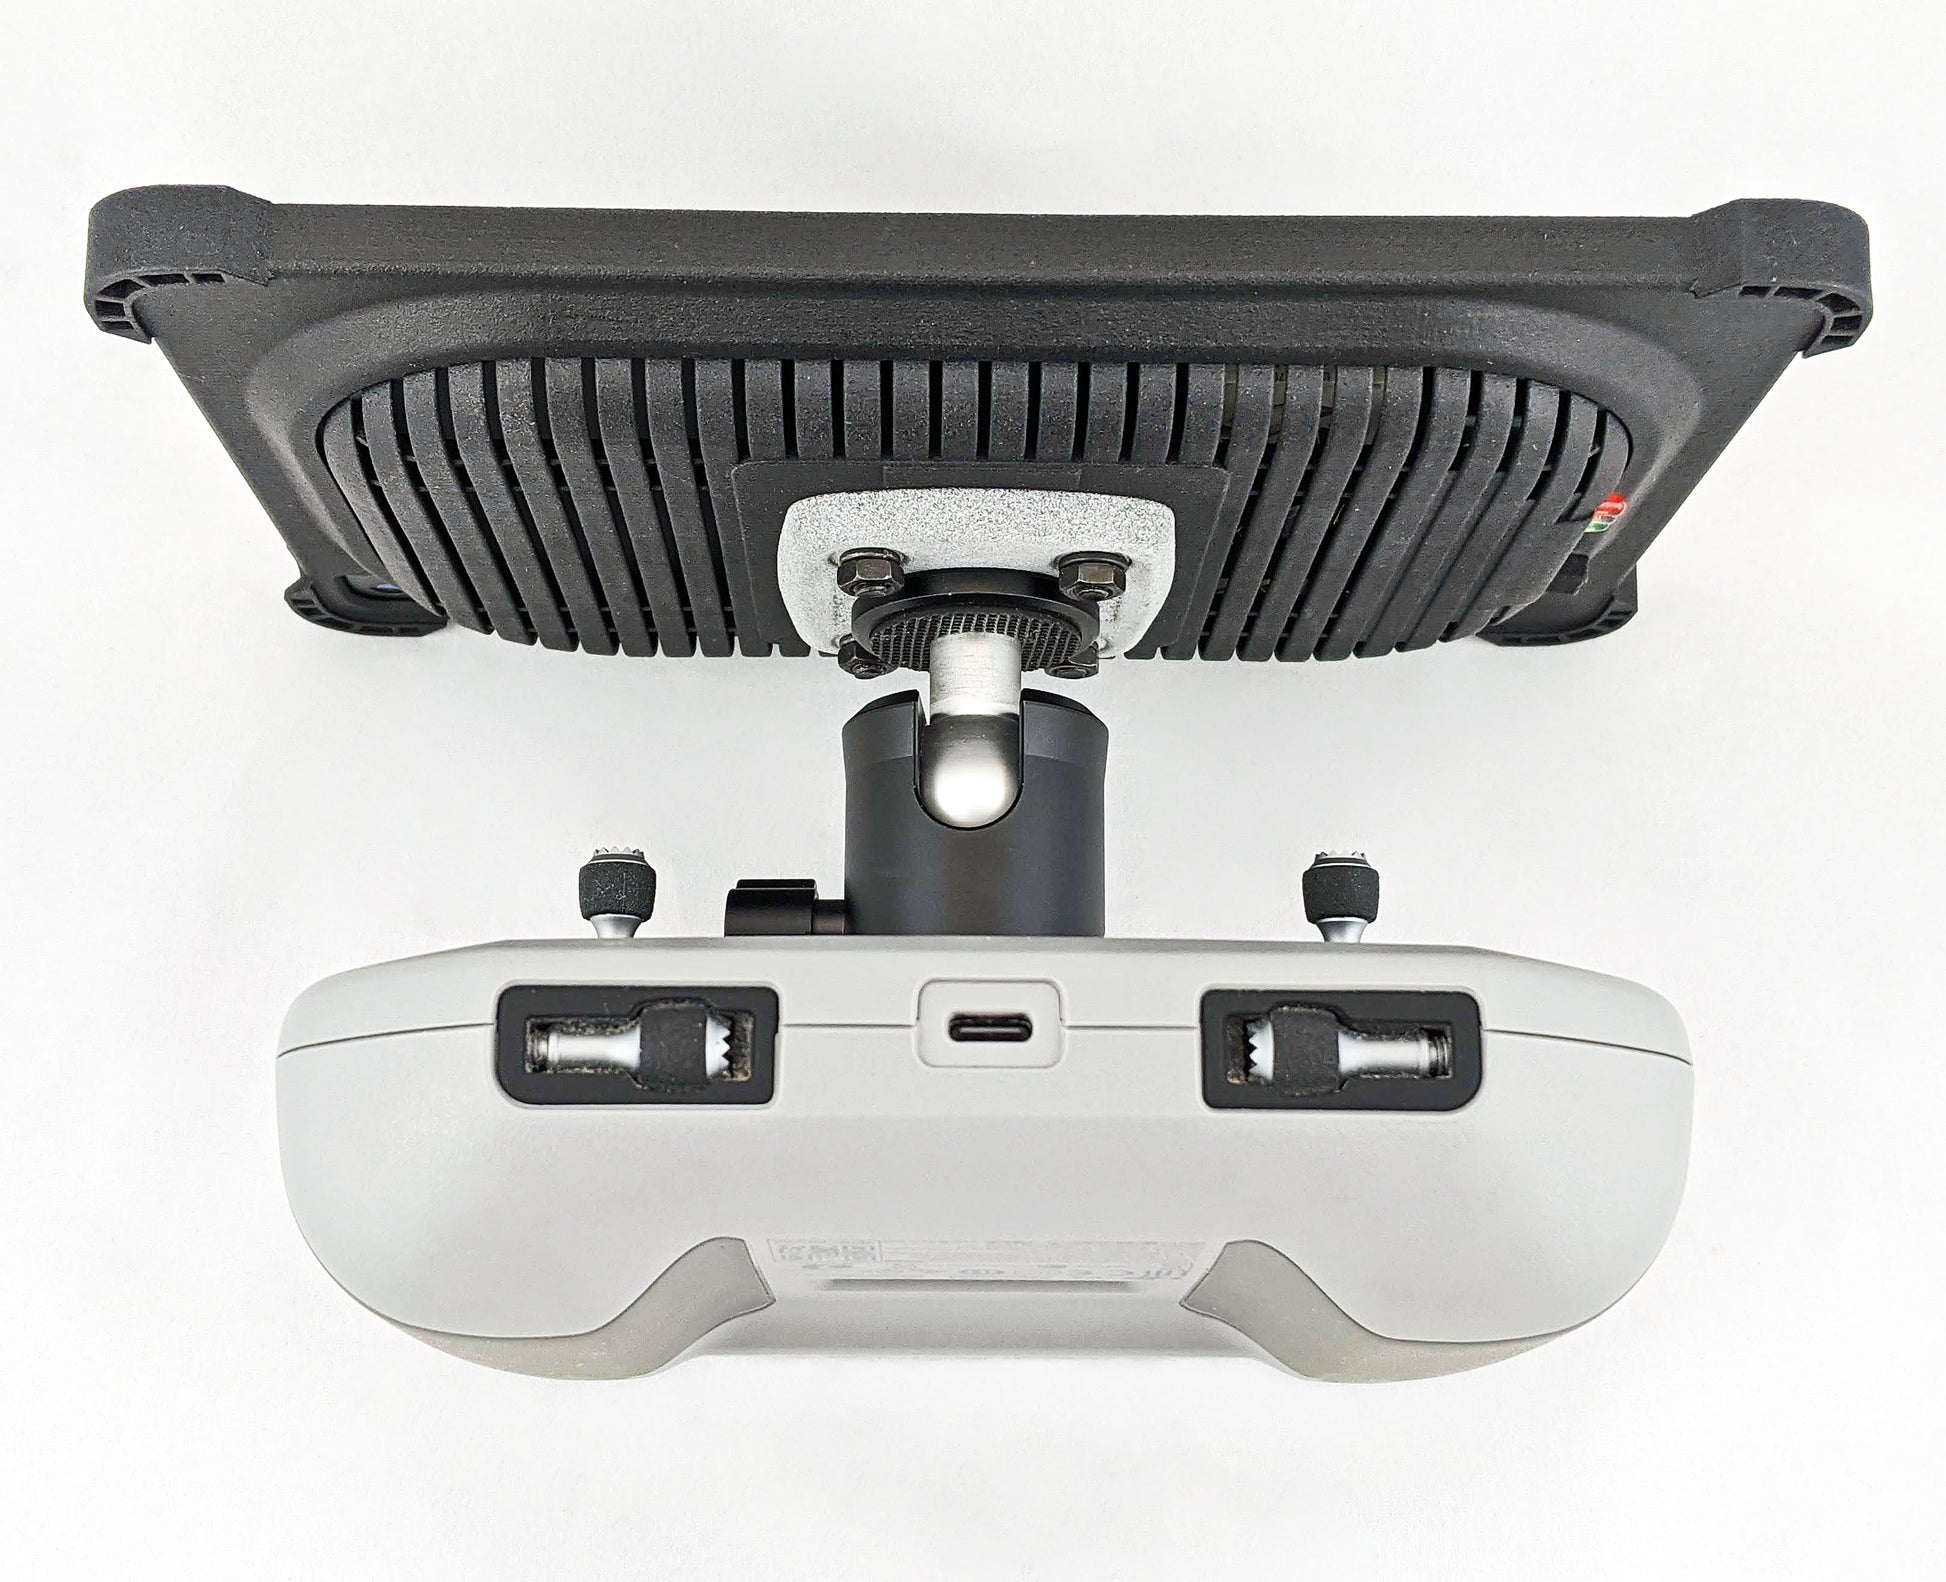 An iPad Cooling Case secured onto a Mavmount on a DJI Mini 2 Controller using the WWMM Adapter